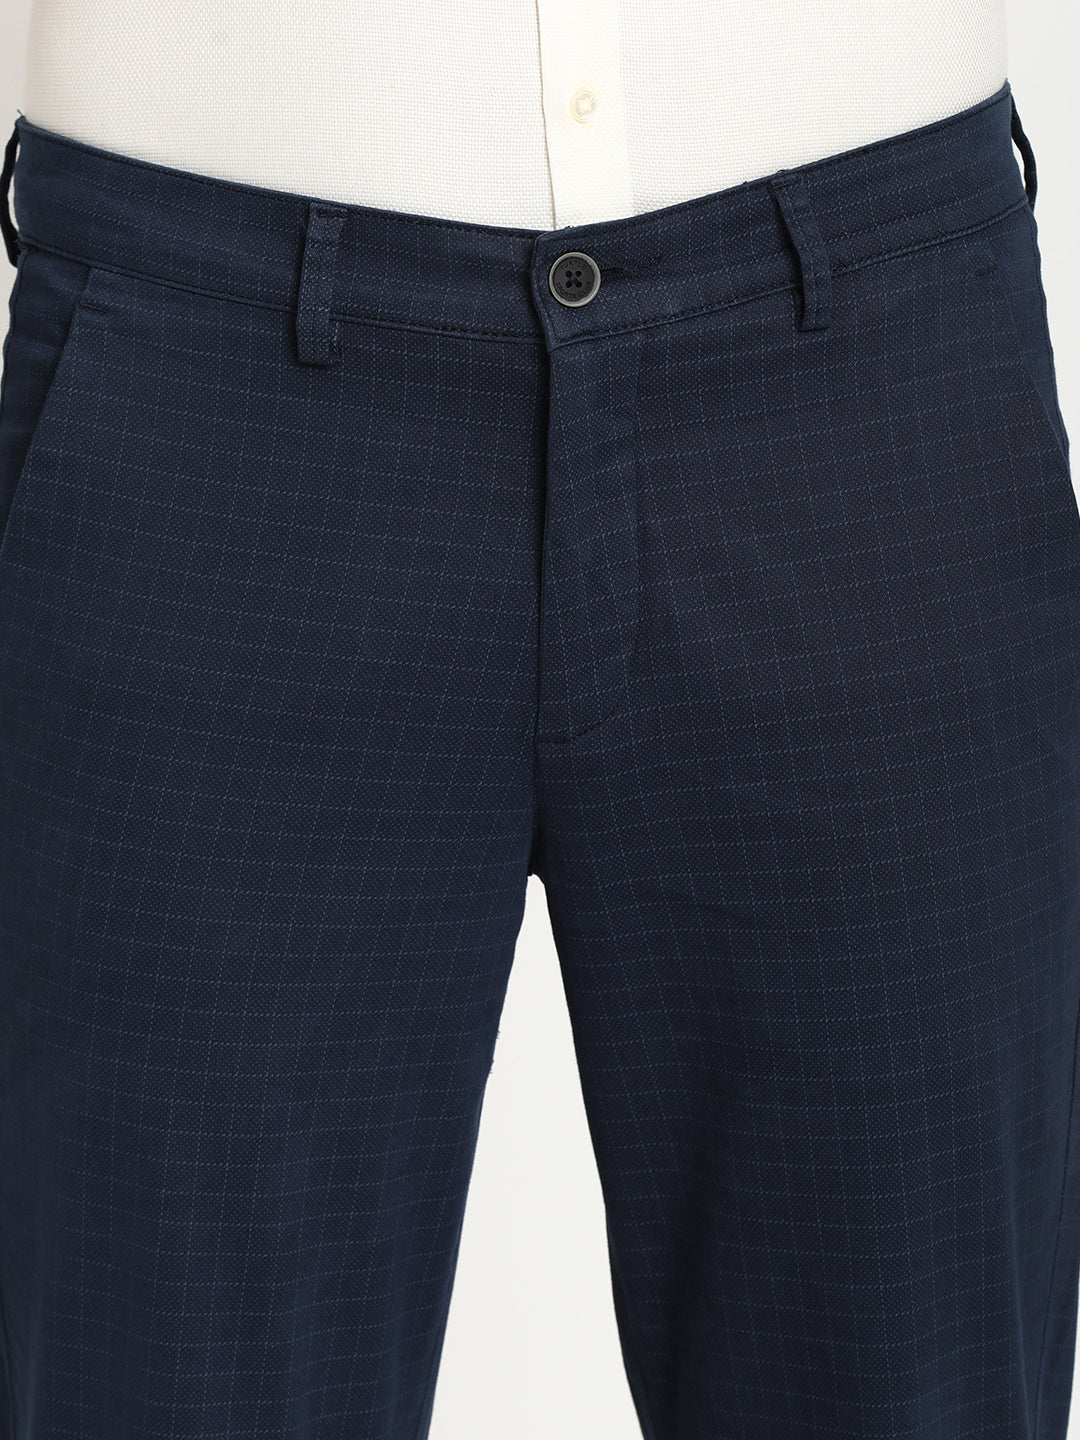 Cotton Stretch Navy Blue Checked Ultra Slim Fit Trouser